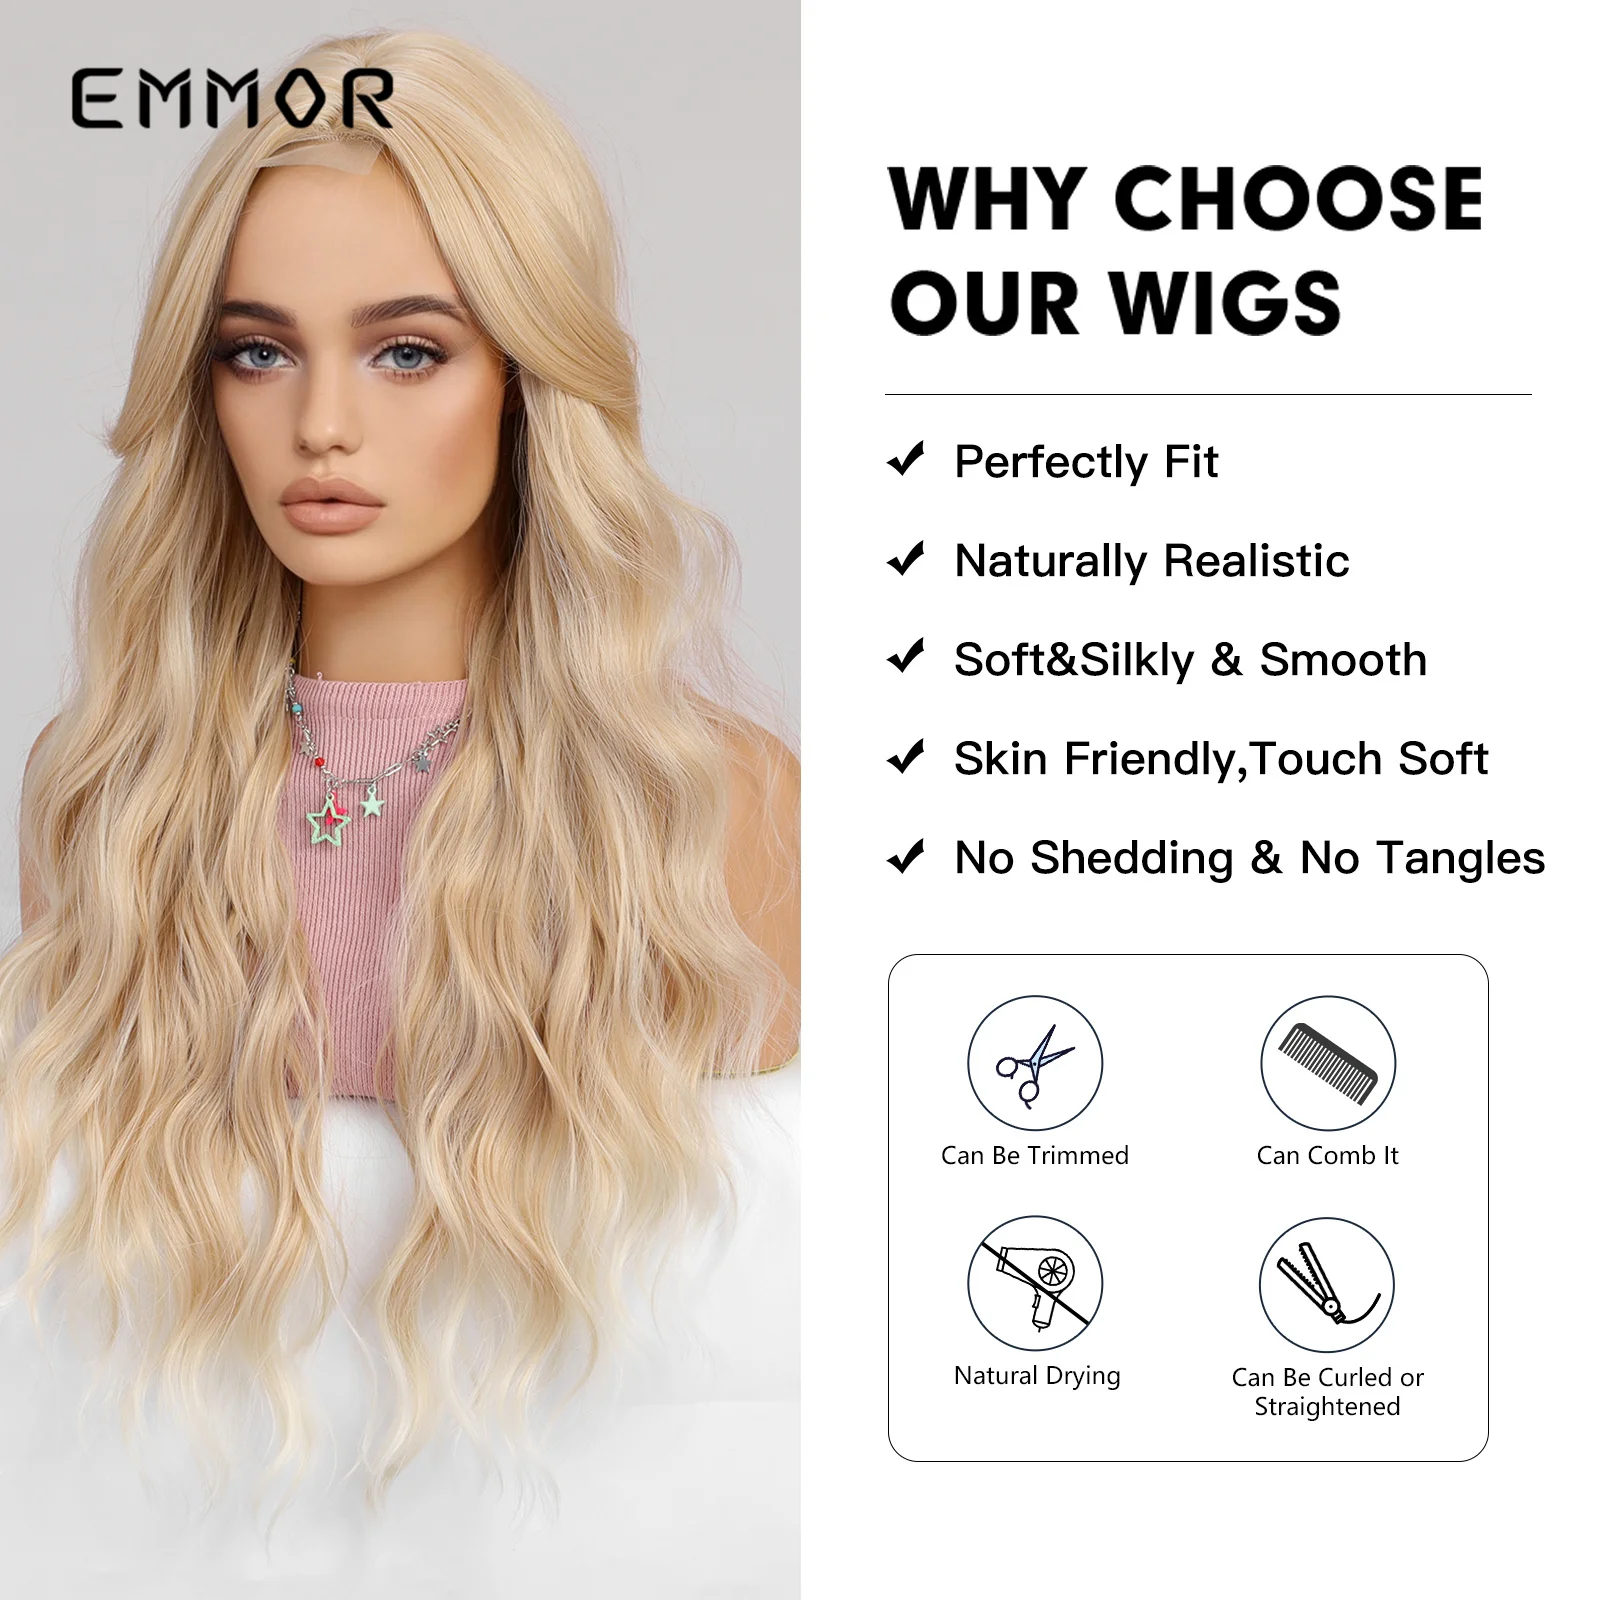 Emmor Synthetic Blonde Long Wavy Wigs with Bangs for Women Cosplay Natural Light Hair Wig High Temperature Fiber